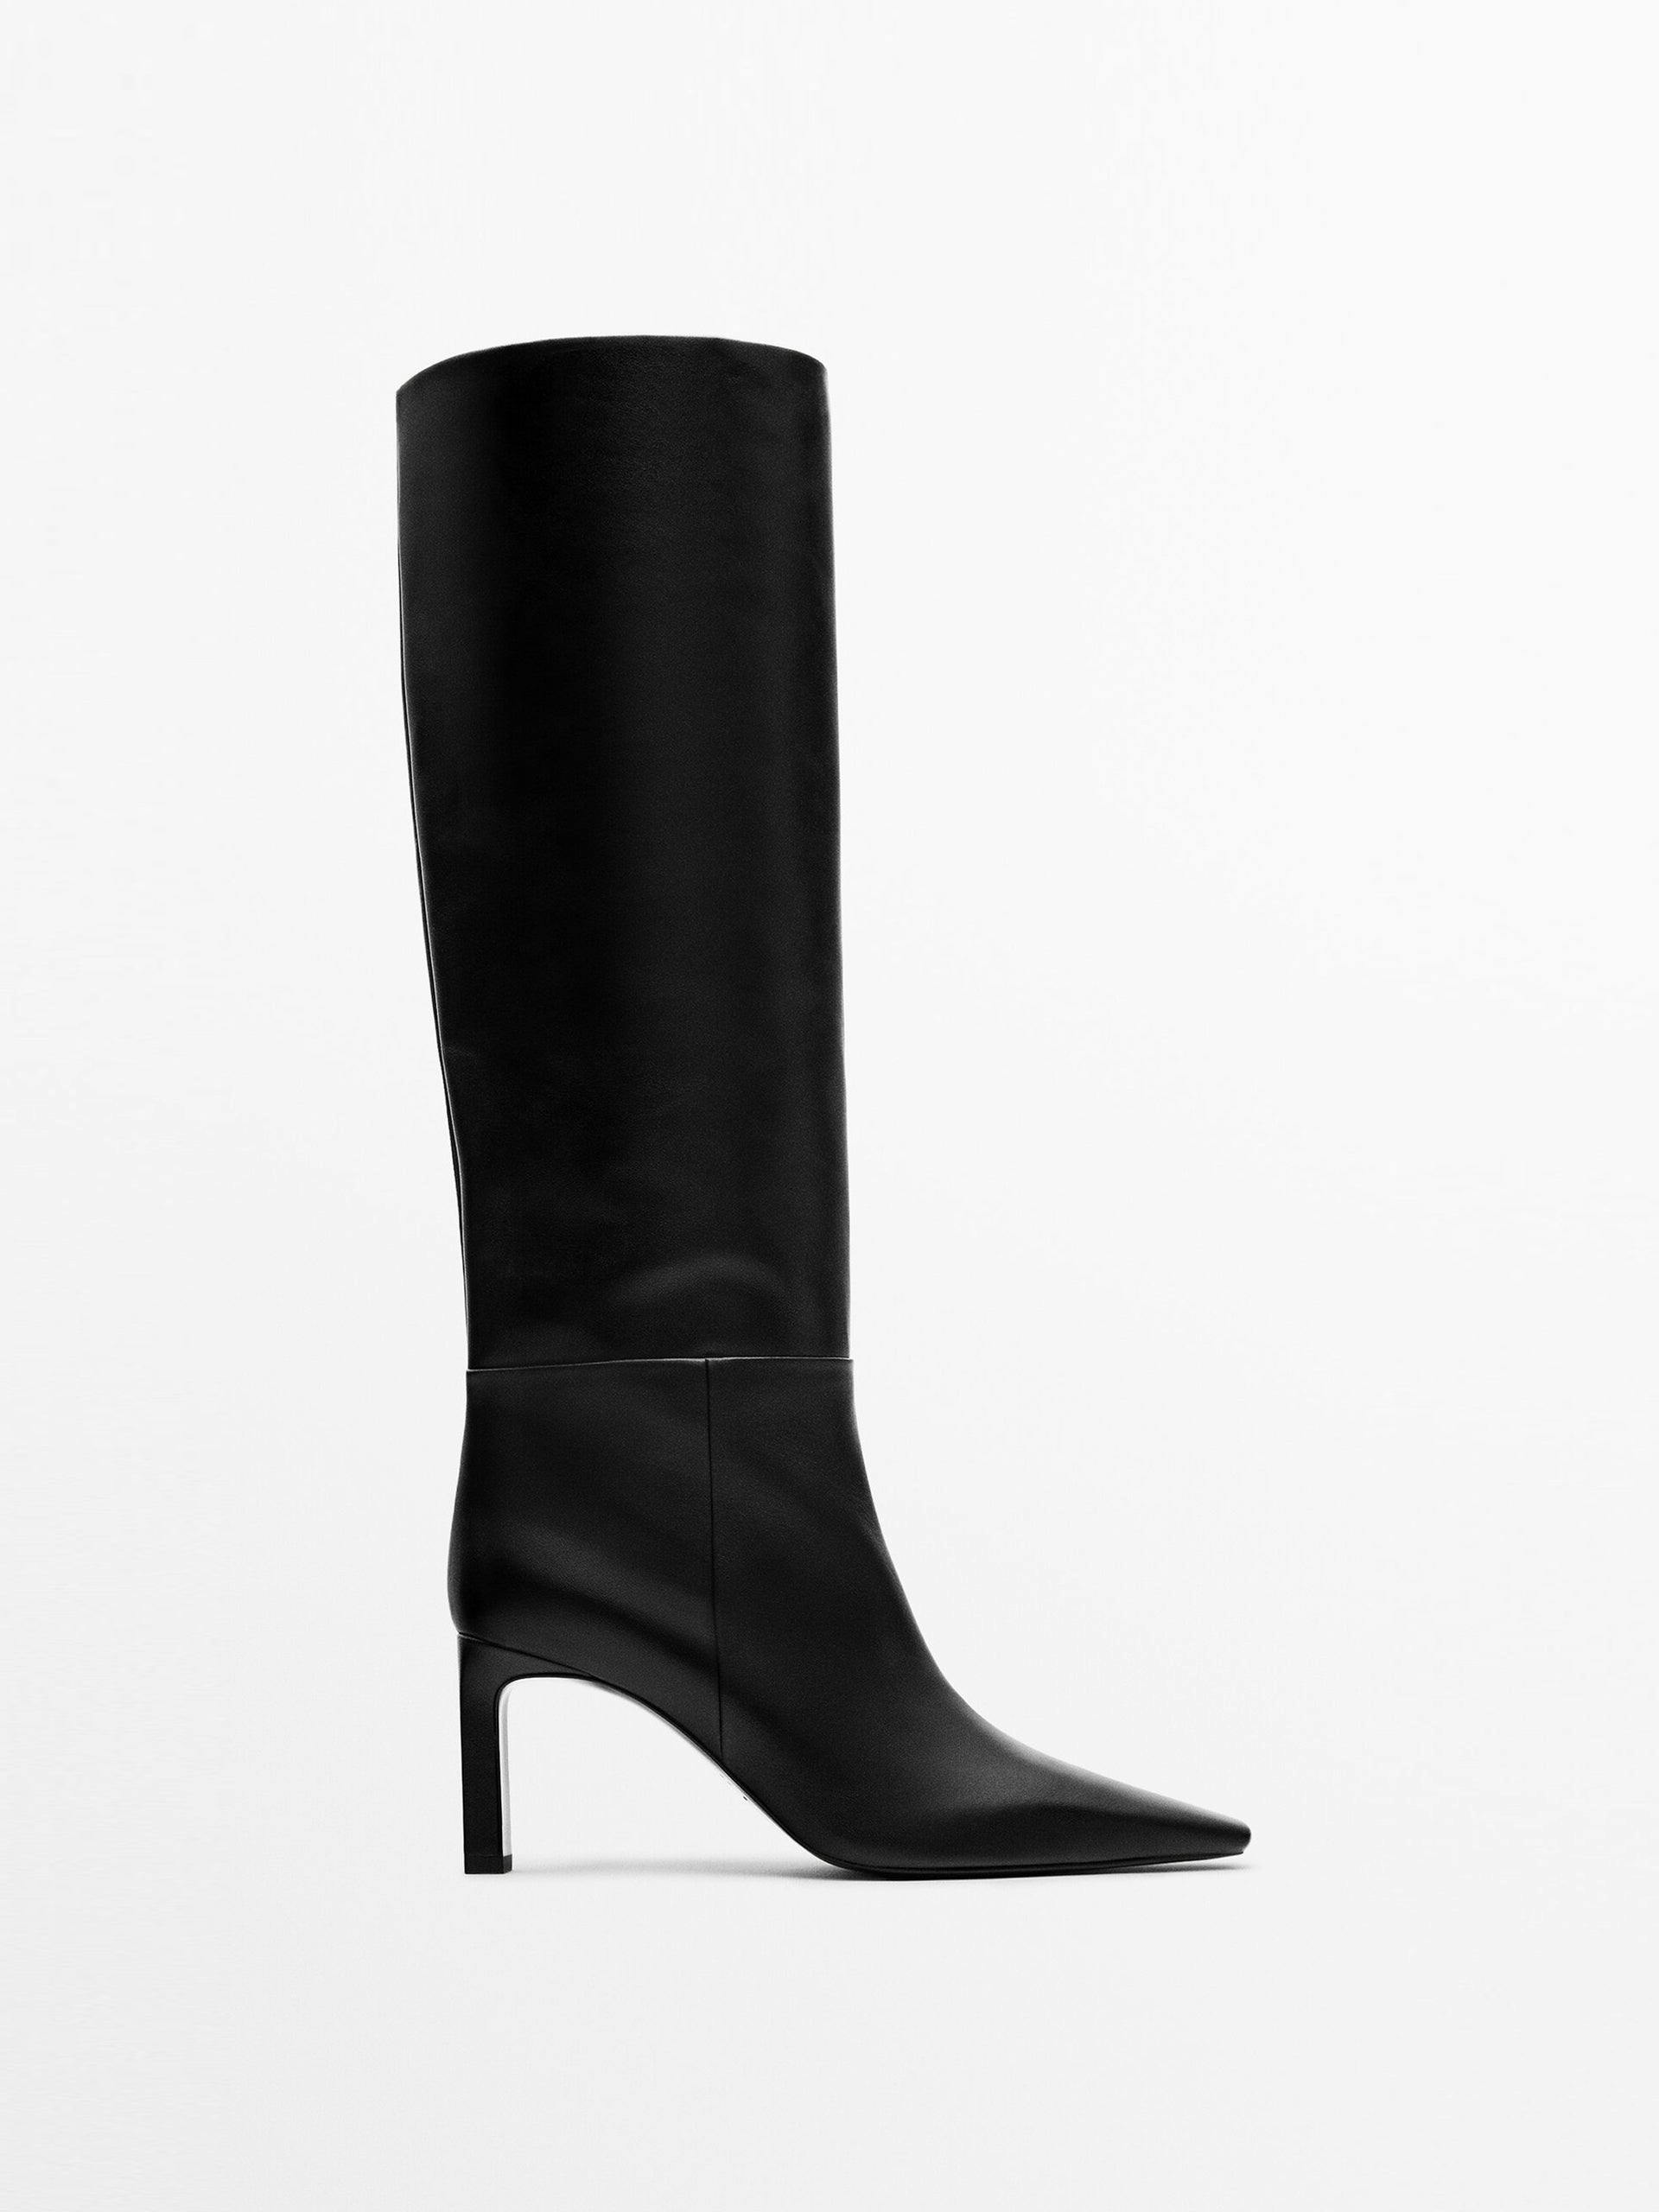 Black leather boots with square heel